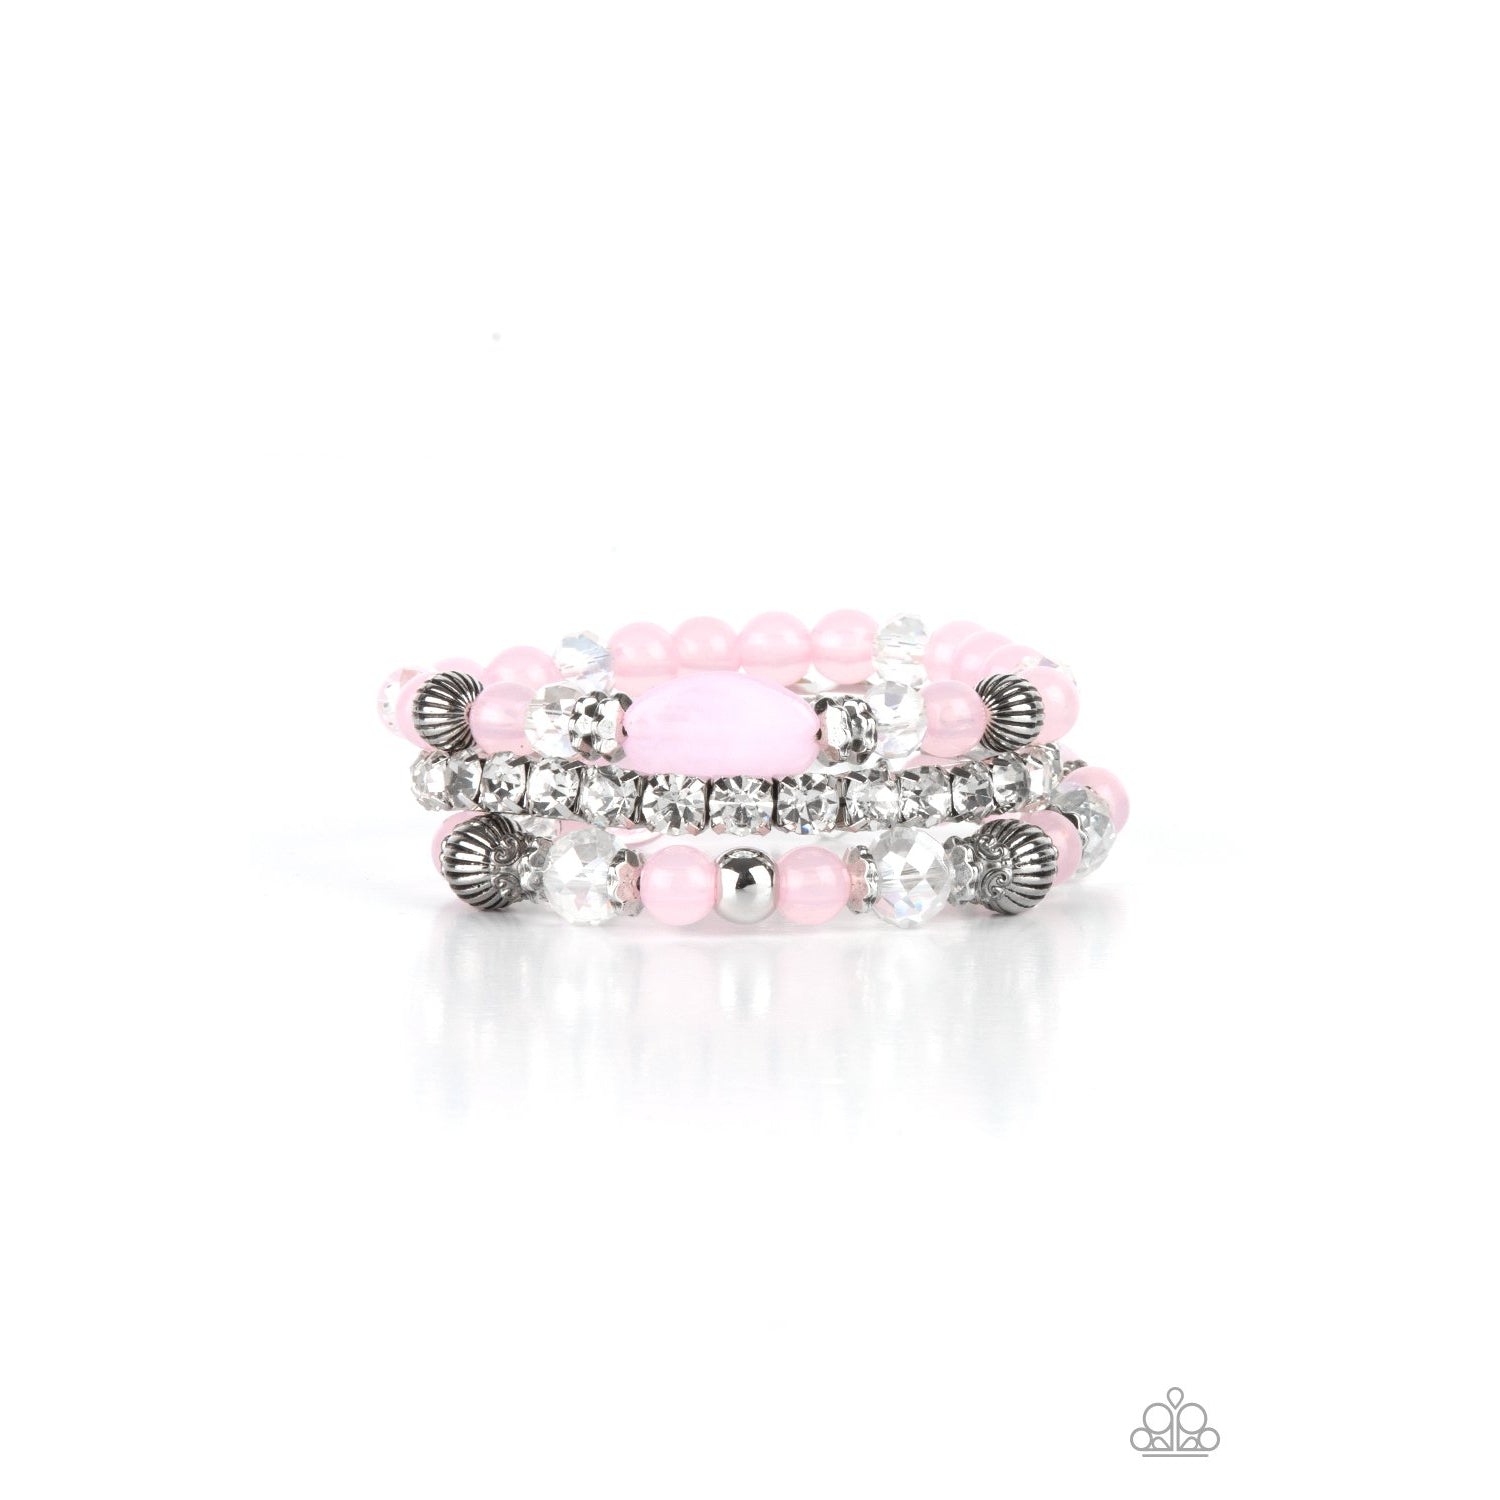 Ethereal Etiquette - Pink and White Rhinestone Bracelets - Paparazzi Accessories - GlaMarous Titi Jewels